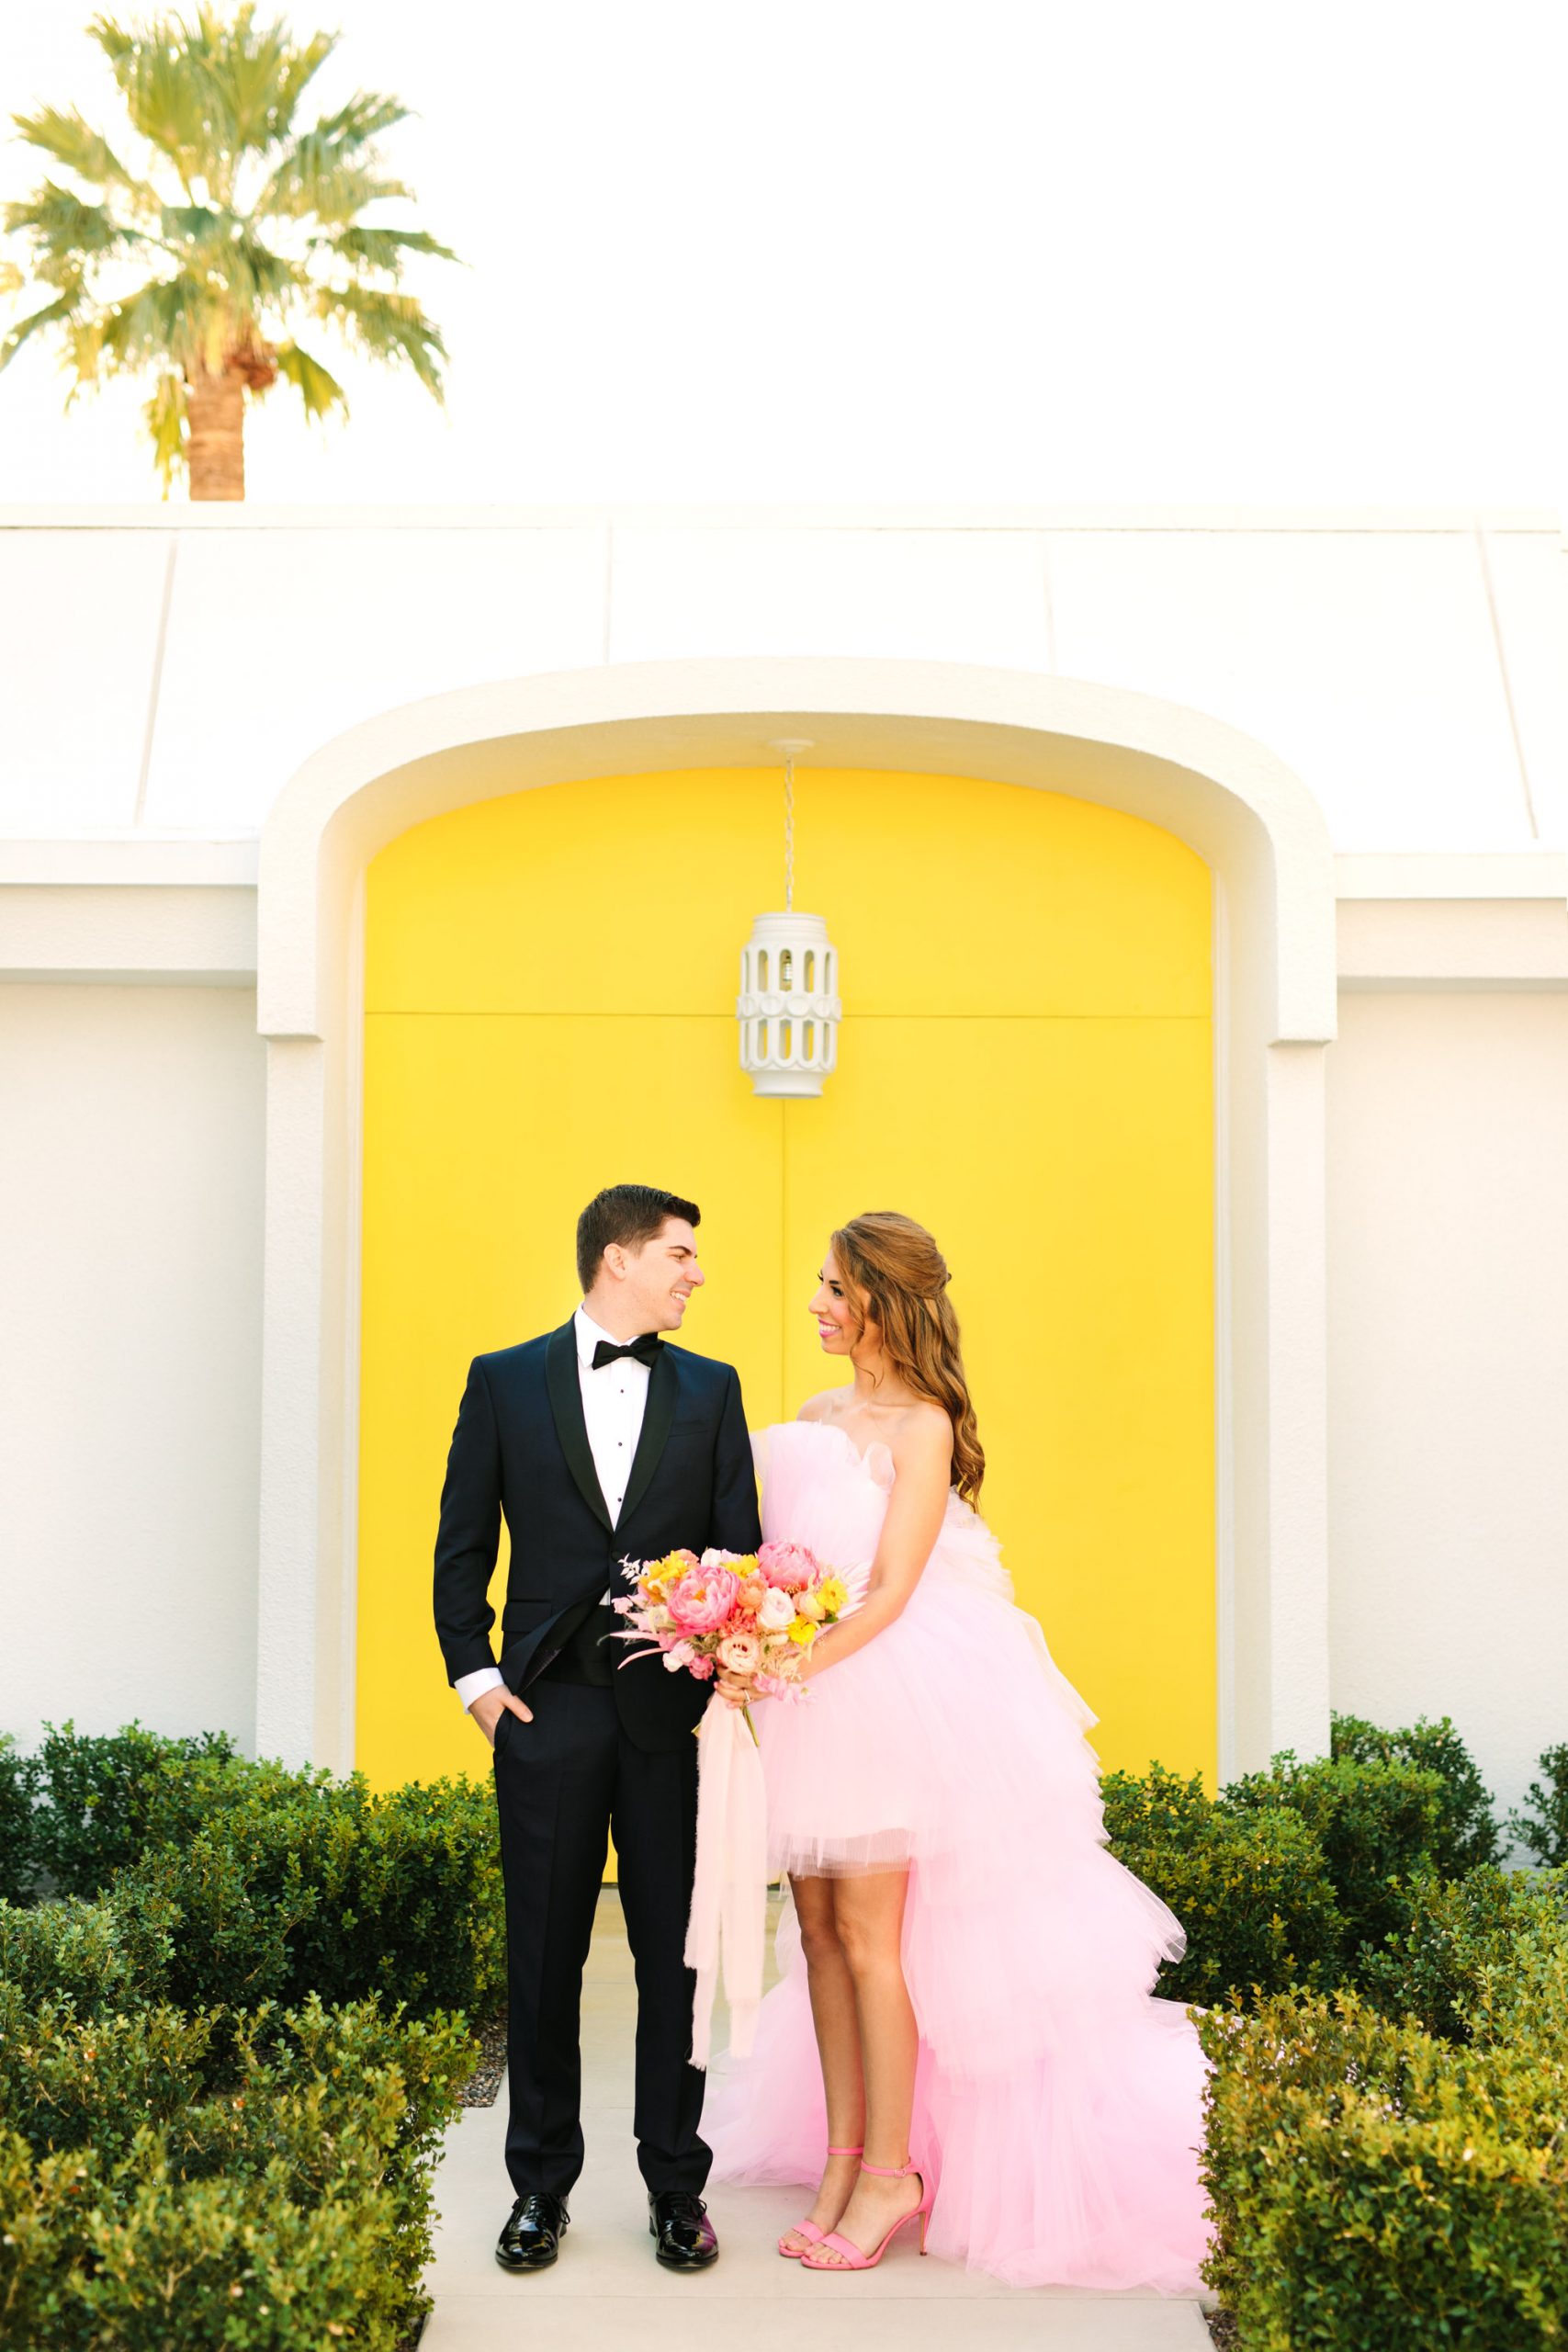 Pink wedding dress Palm Springs elopement featured on Green Wedding Shoes | Colorful mid-century modern wedding with bright yellow door backdrop | Vibrant and elevated wedding photos for fun-loving couples in Southern California #palmspringswedding #palmspringselopement #pinkwedding #greenweddingshoes Source: Mary Costa Photography | Los Angeles